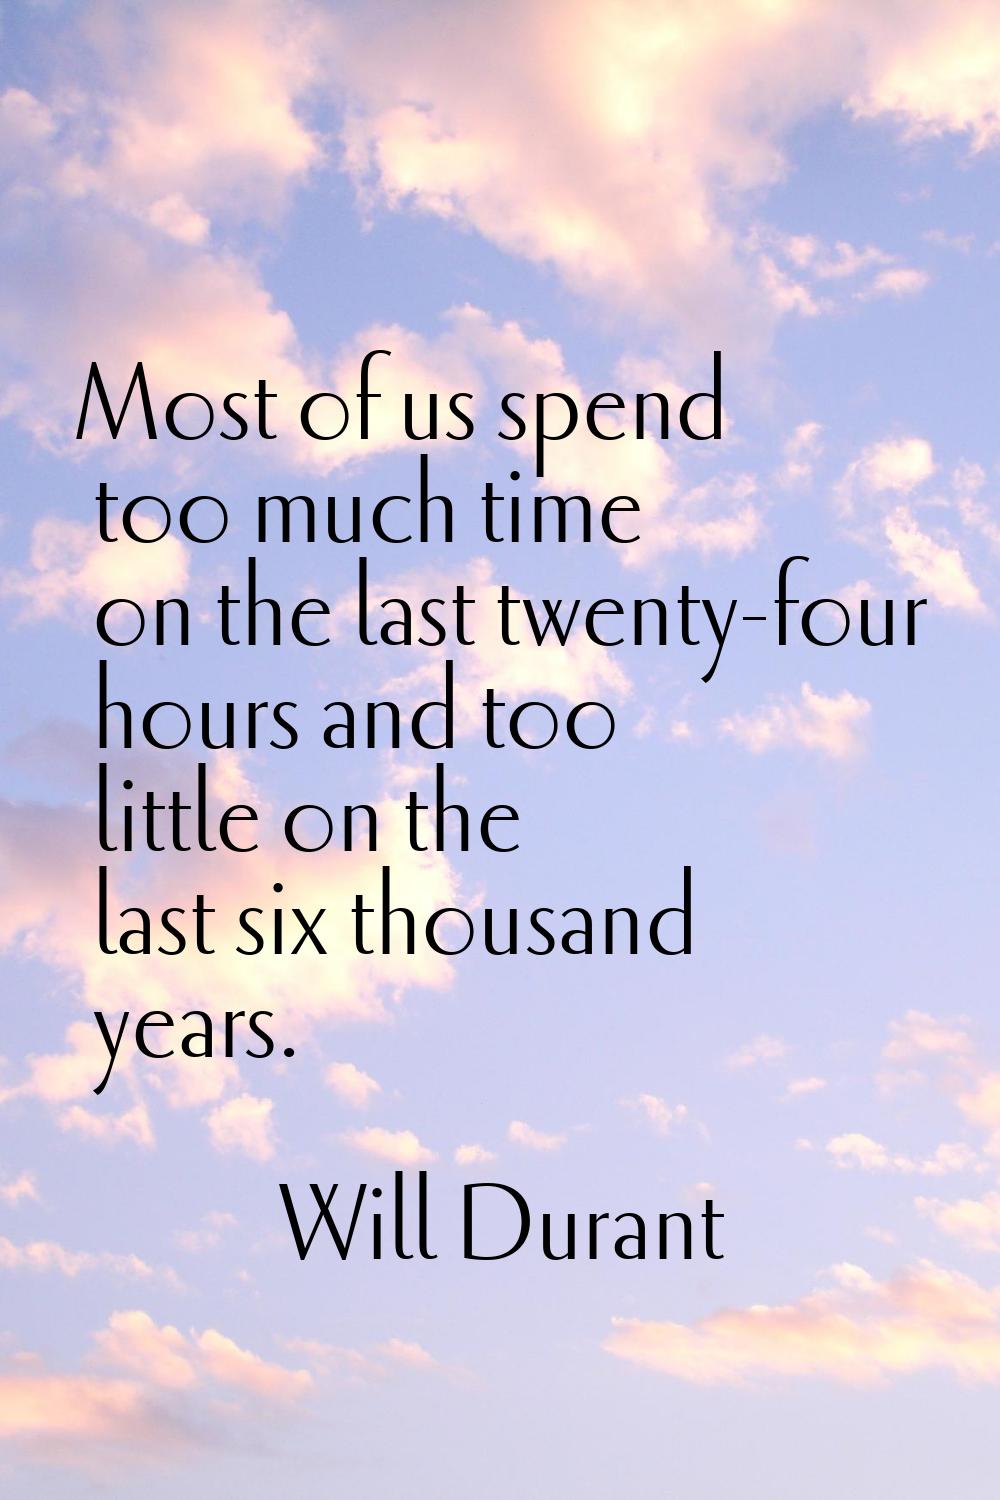 Most of us spend too much time on the last twenty-four hours and too little on the last six thousan